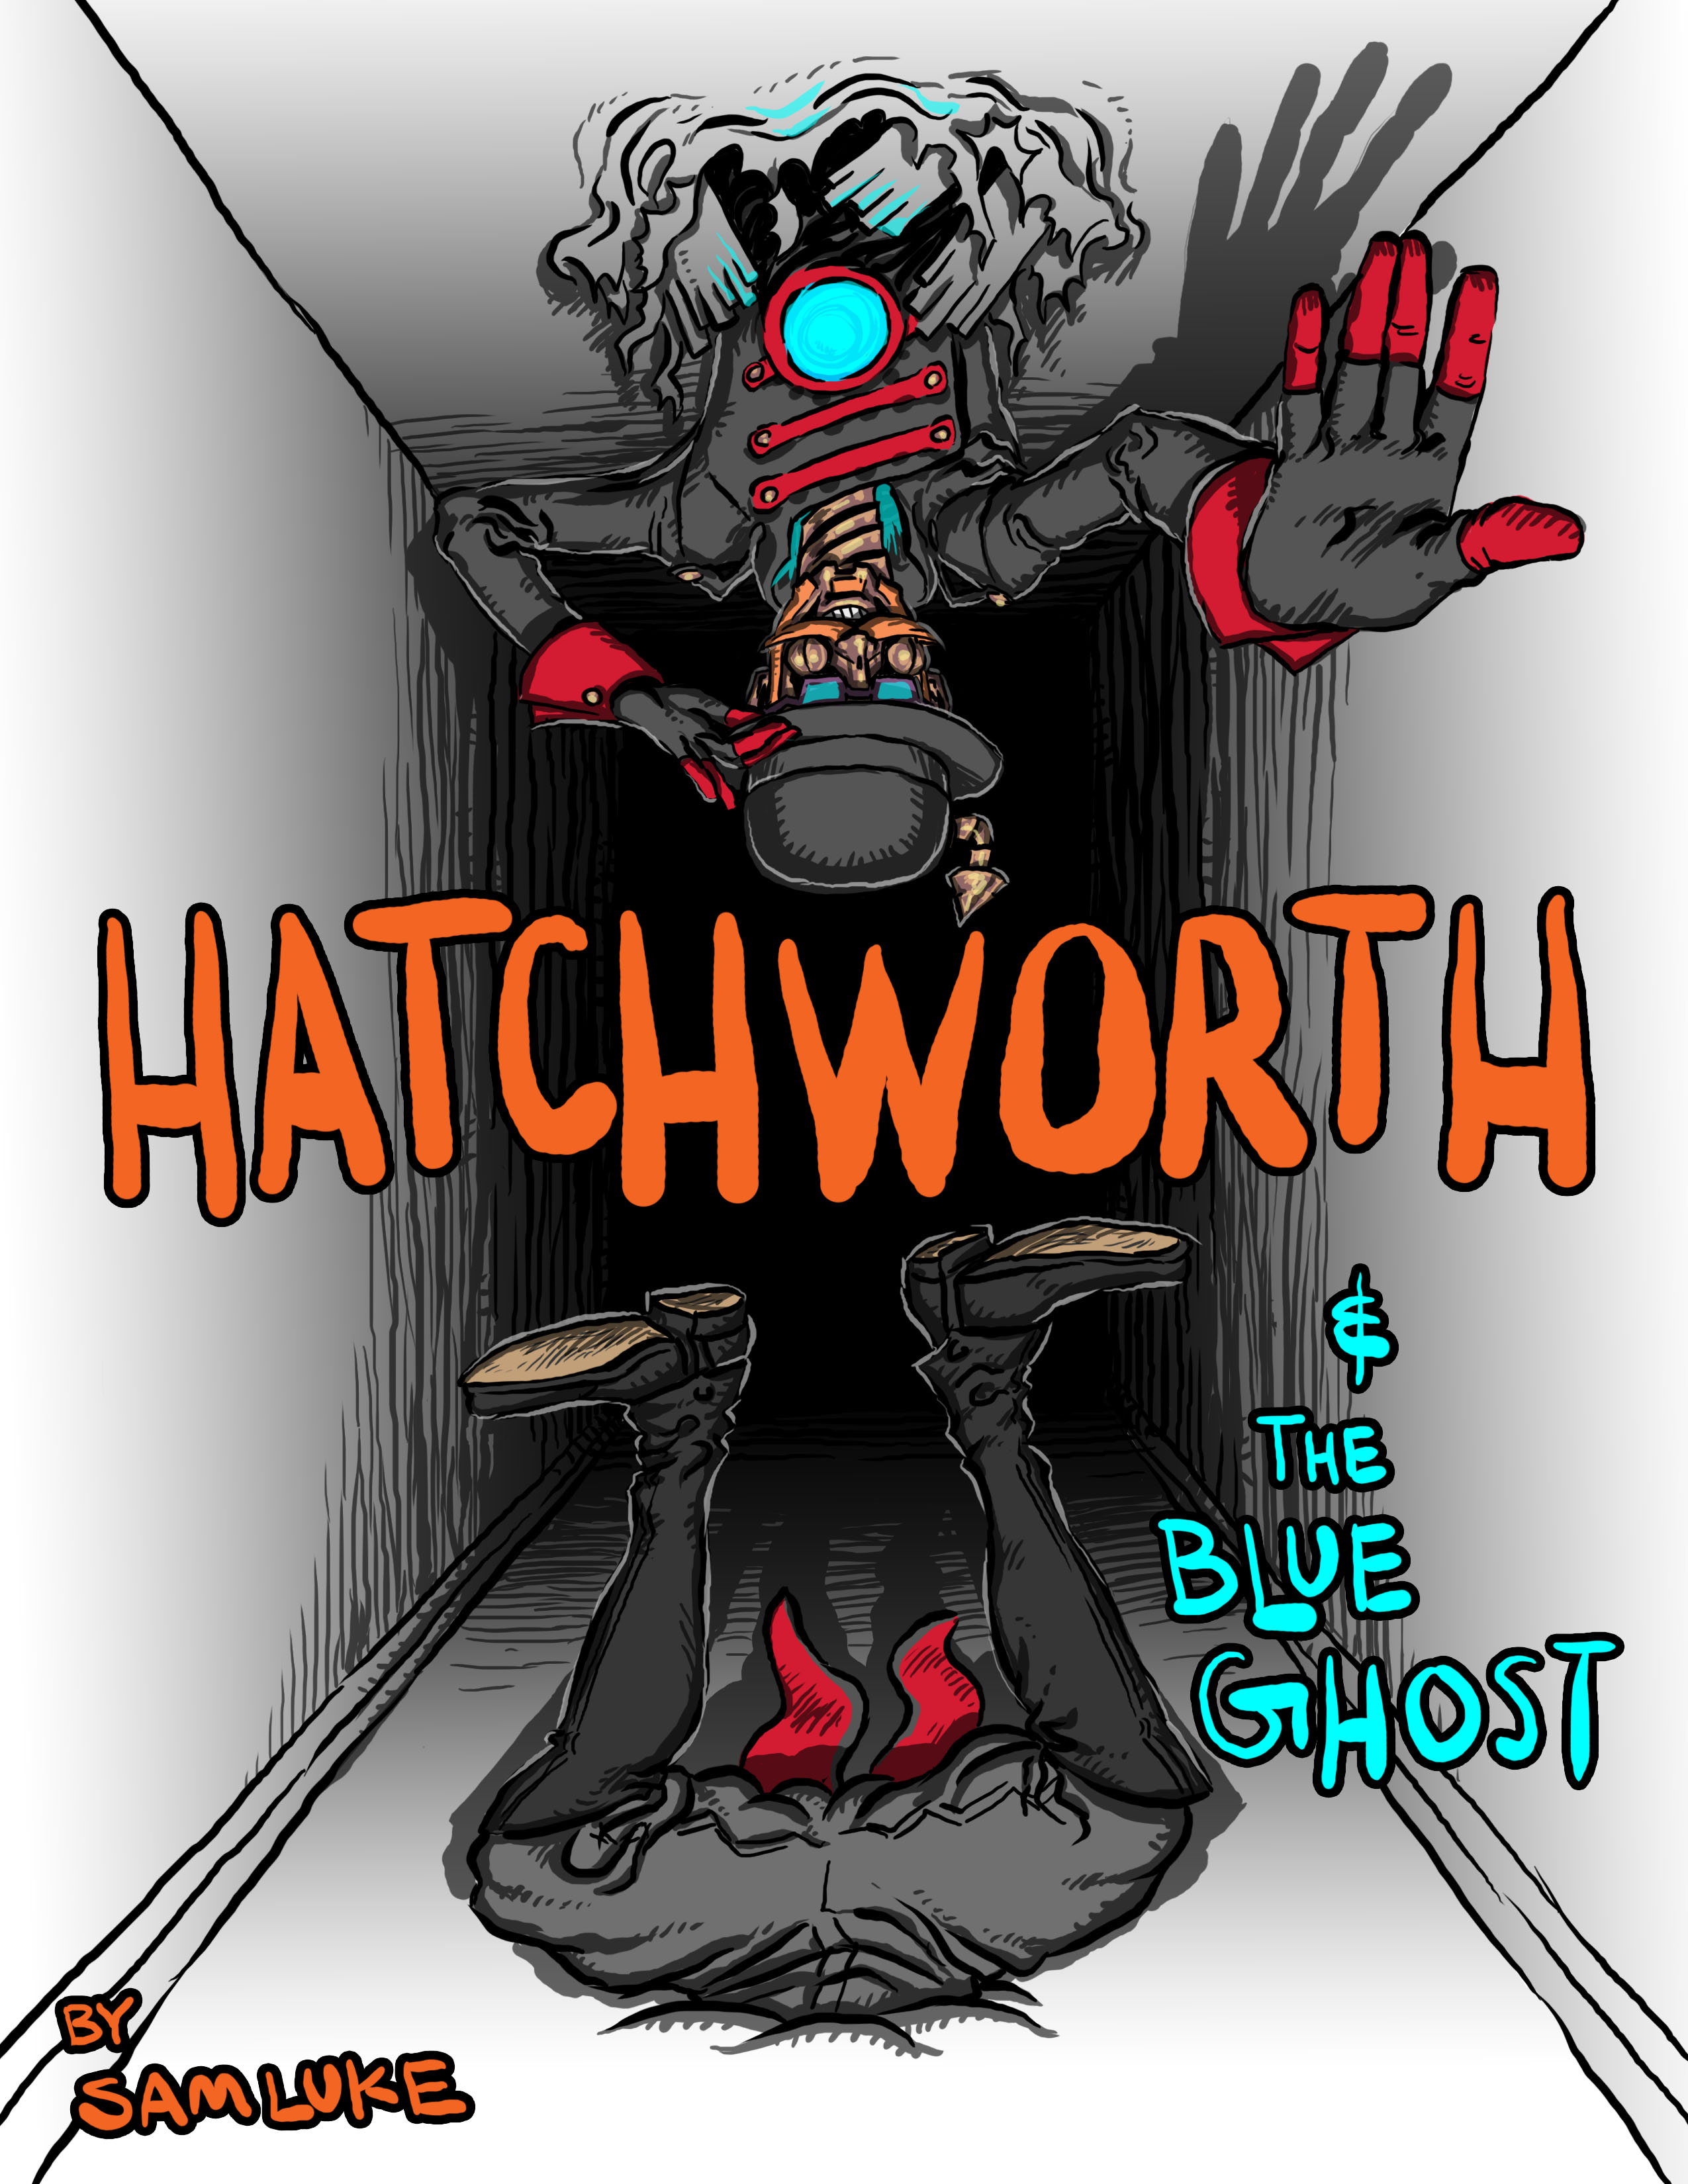 Page 1 – Hatchworth and The Blue Ghost